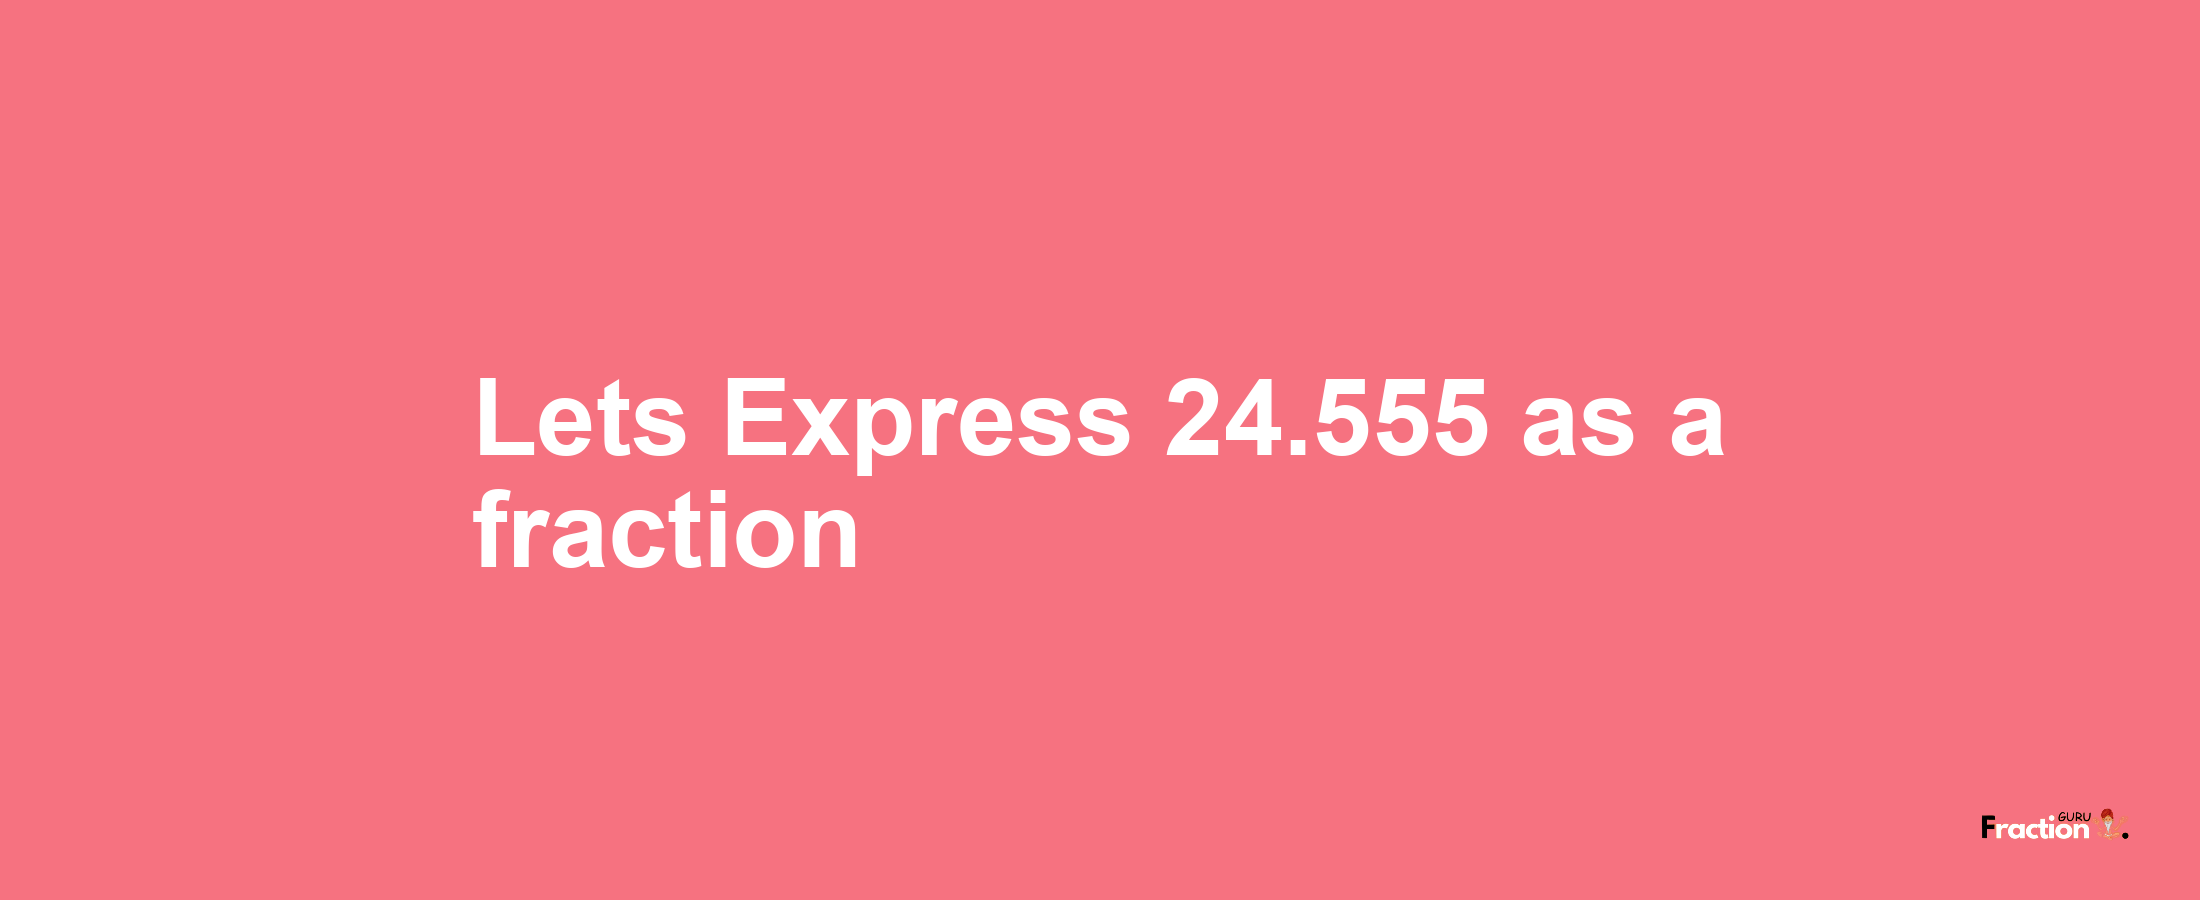 Lets Express 24.555 as afraction